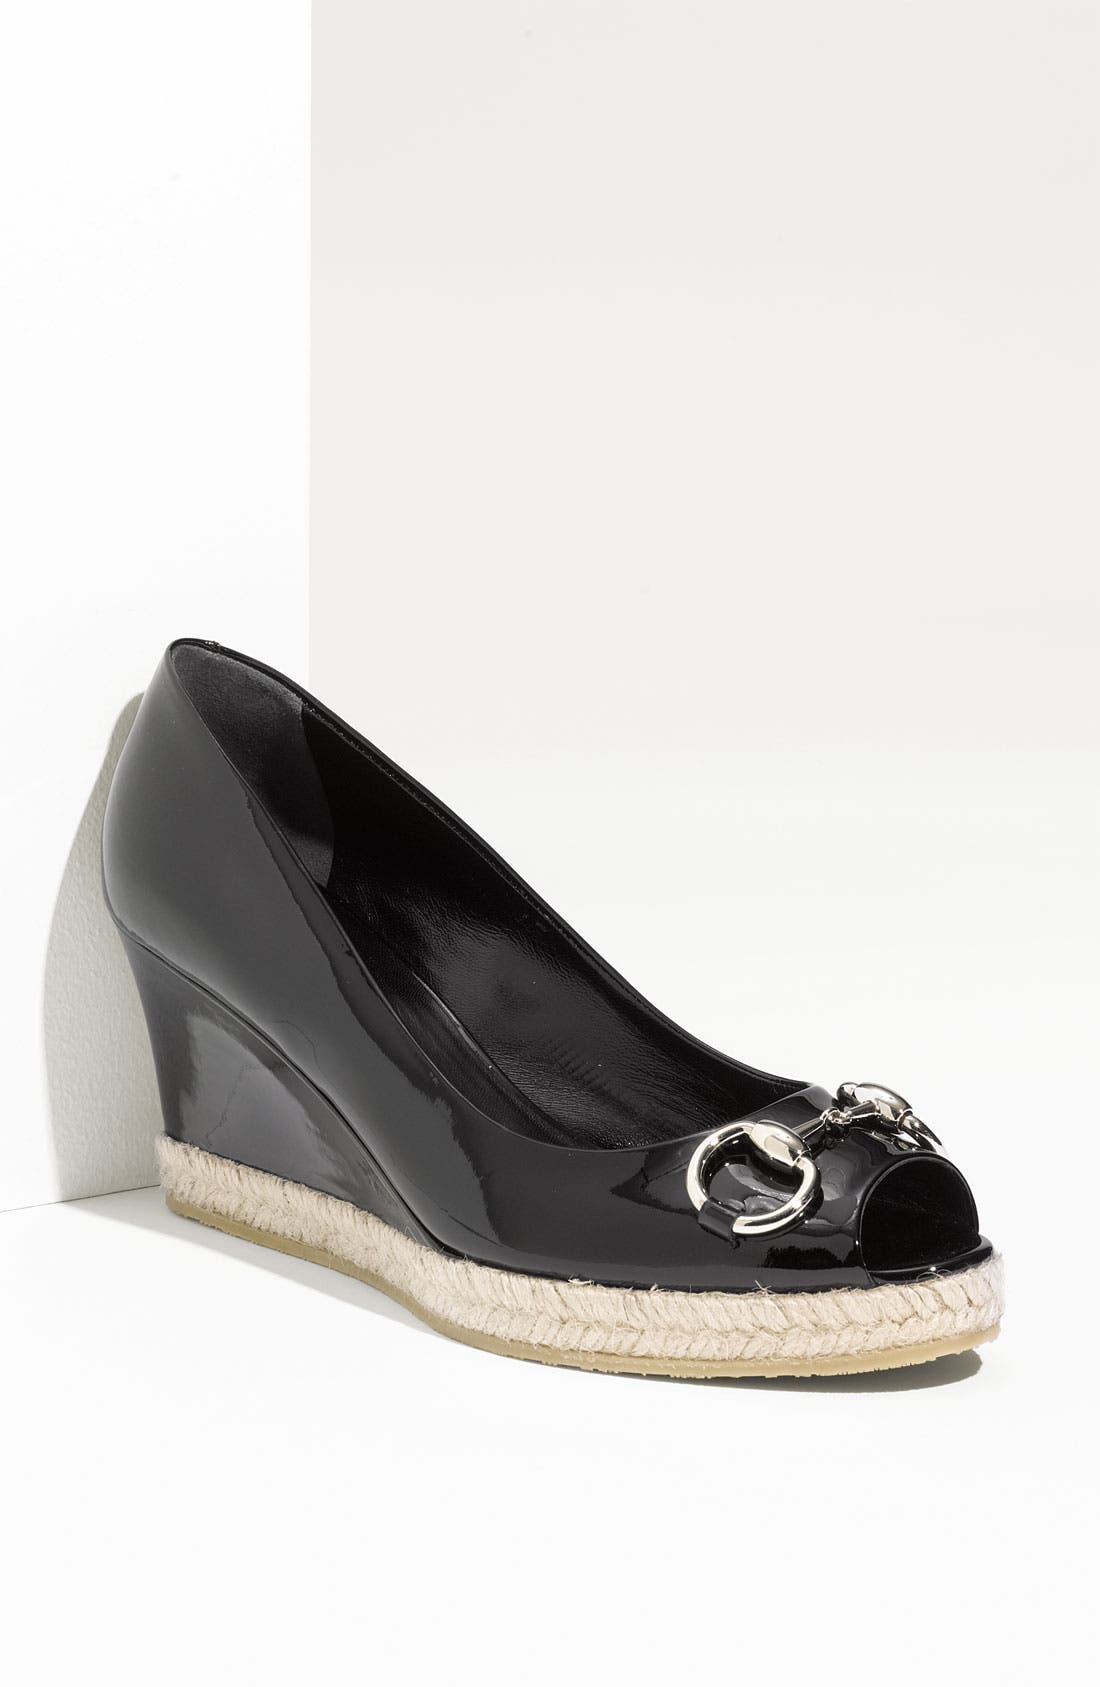 Gucci Patent Leather Wedge Pump | Nordstrom